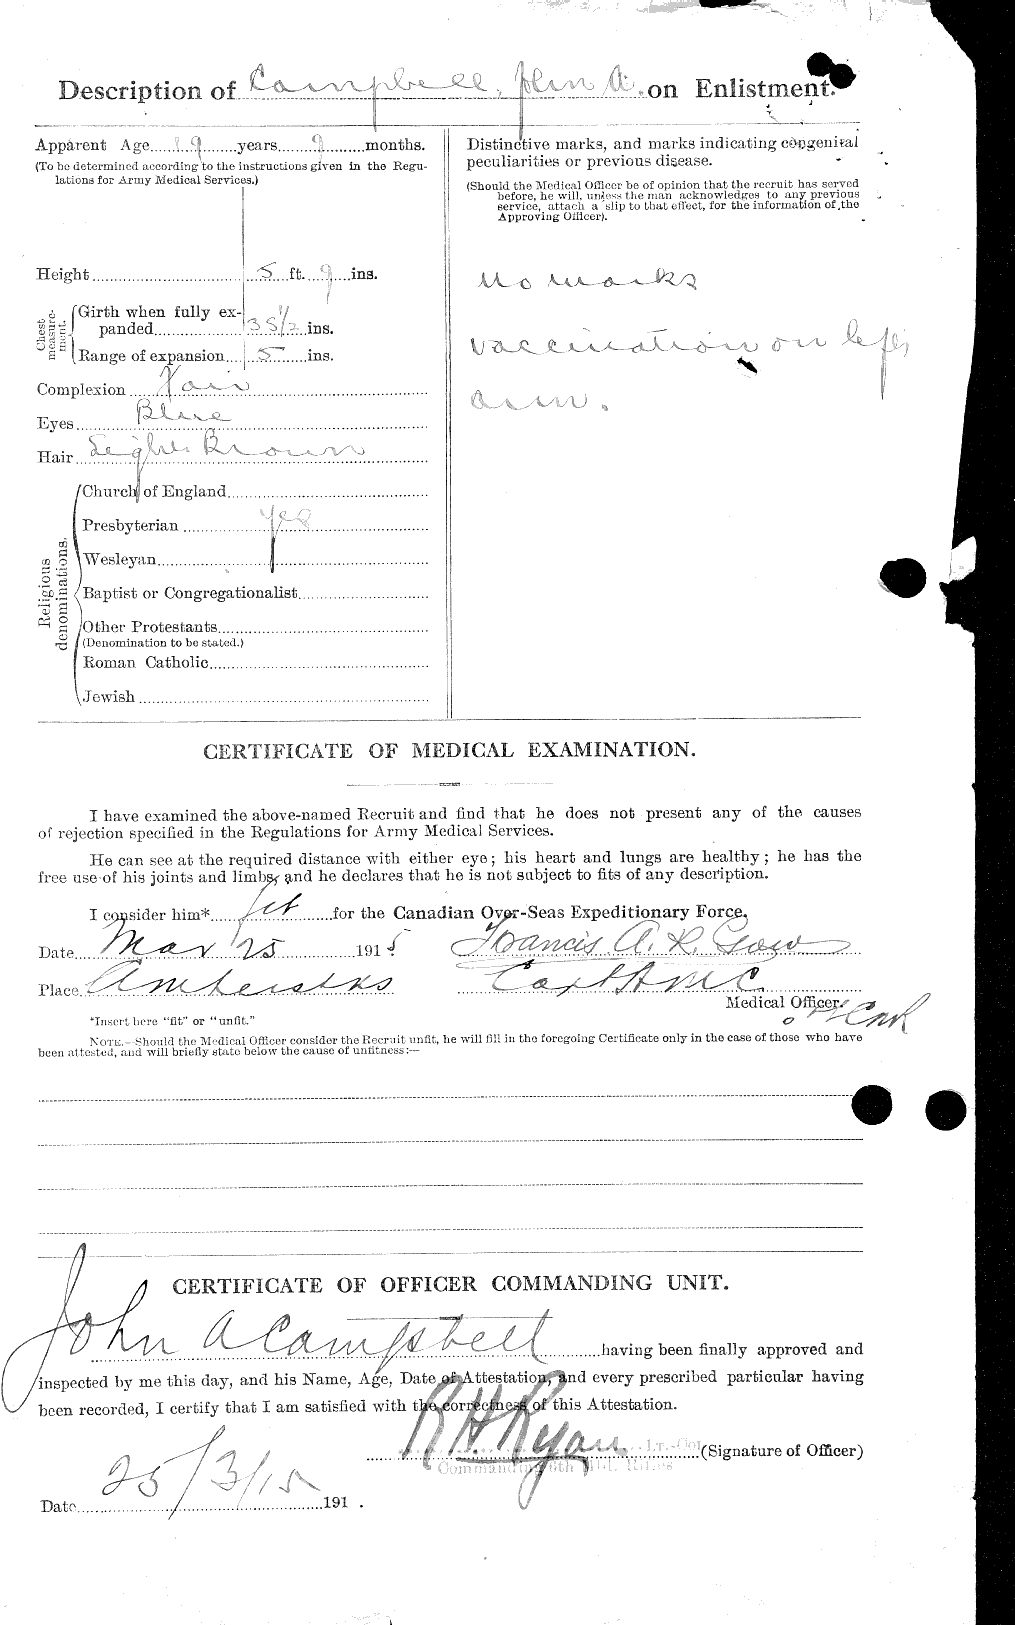 Personnel Records of the First World War - CEF 006855b